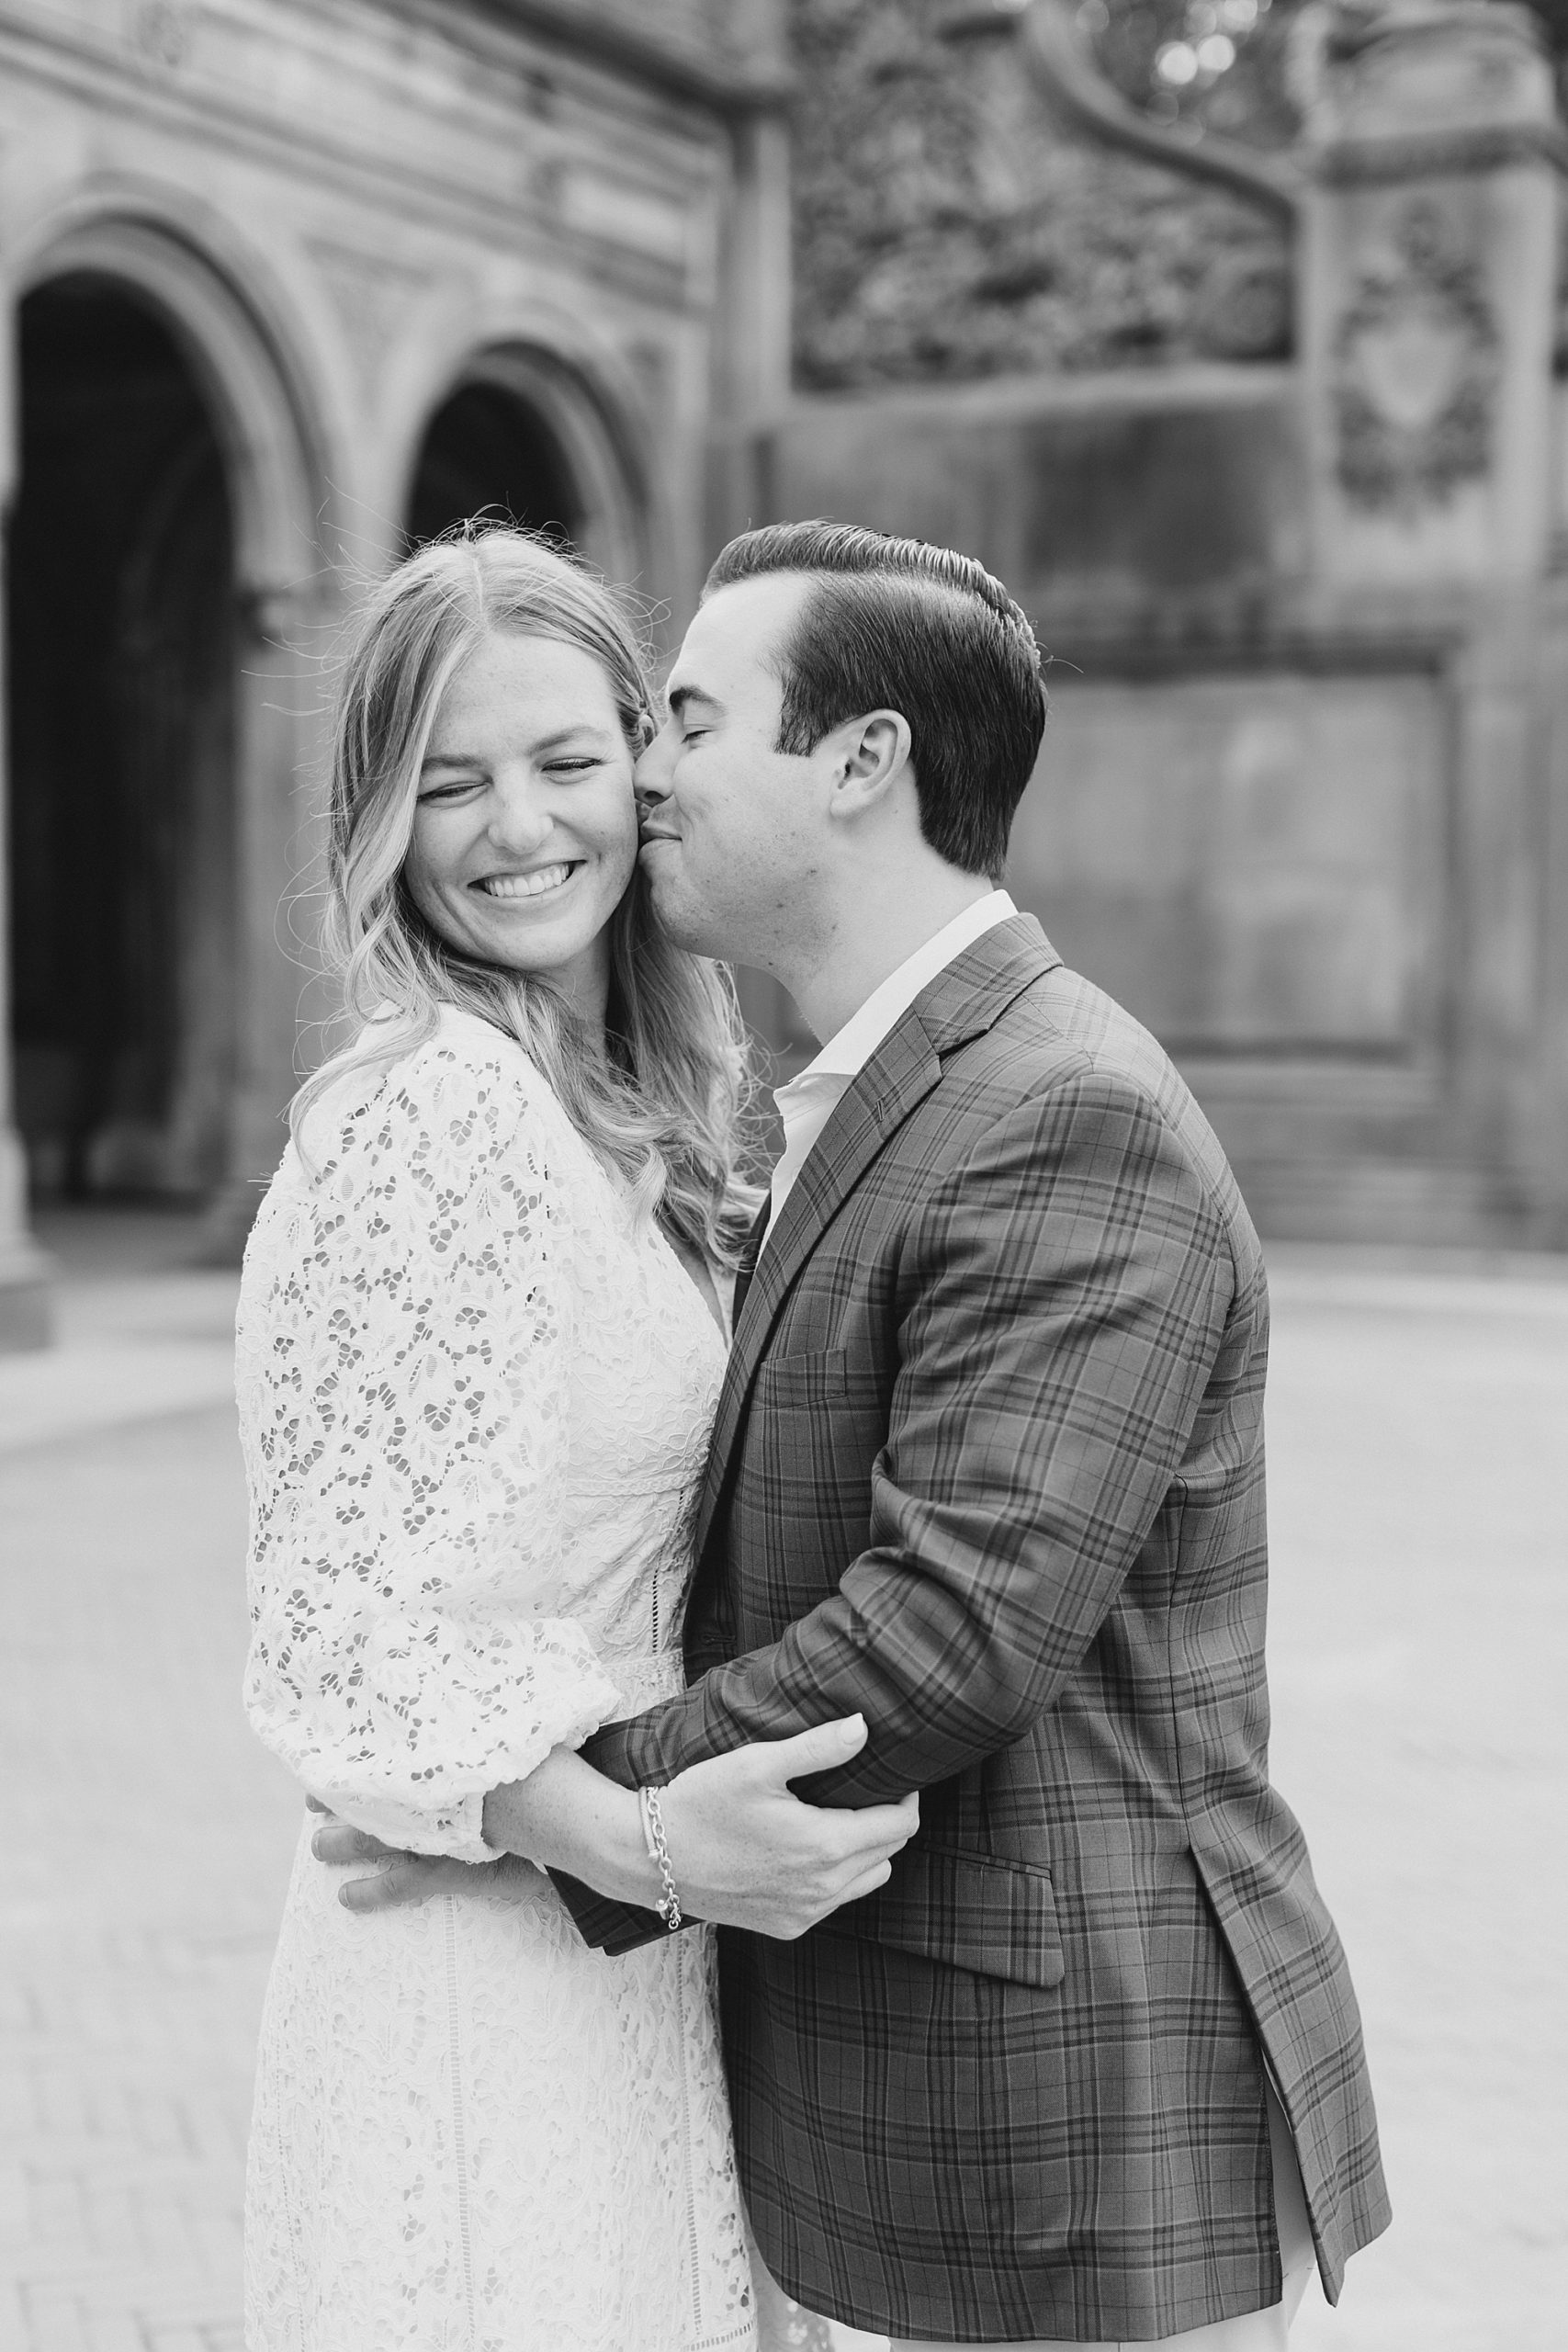 groom kisses bride's cheek during NYC engagement photos 